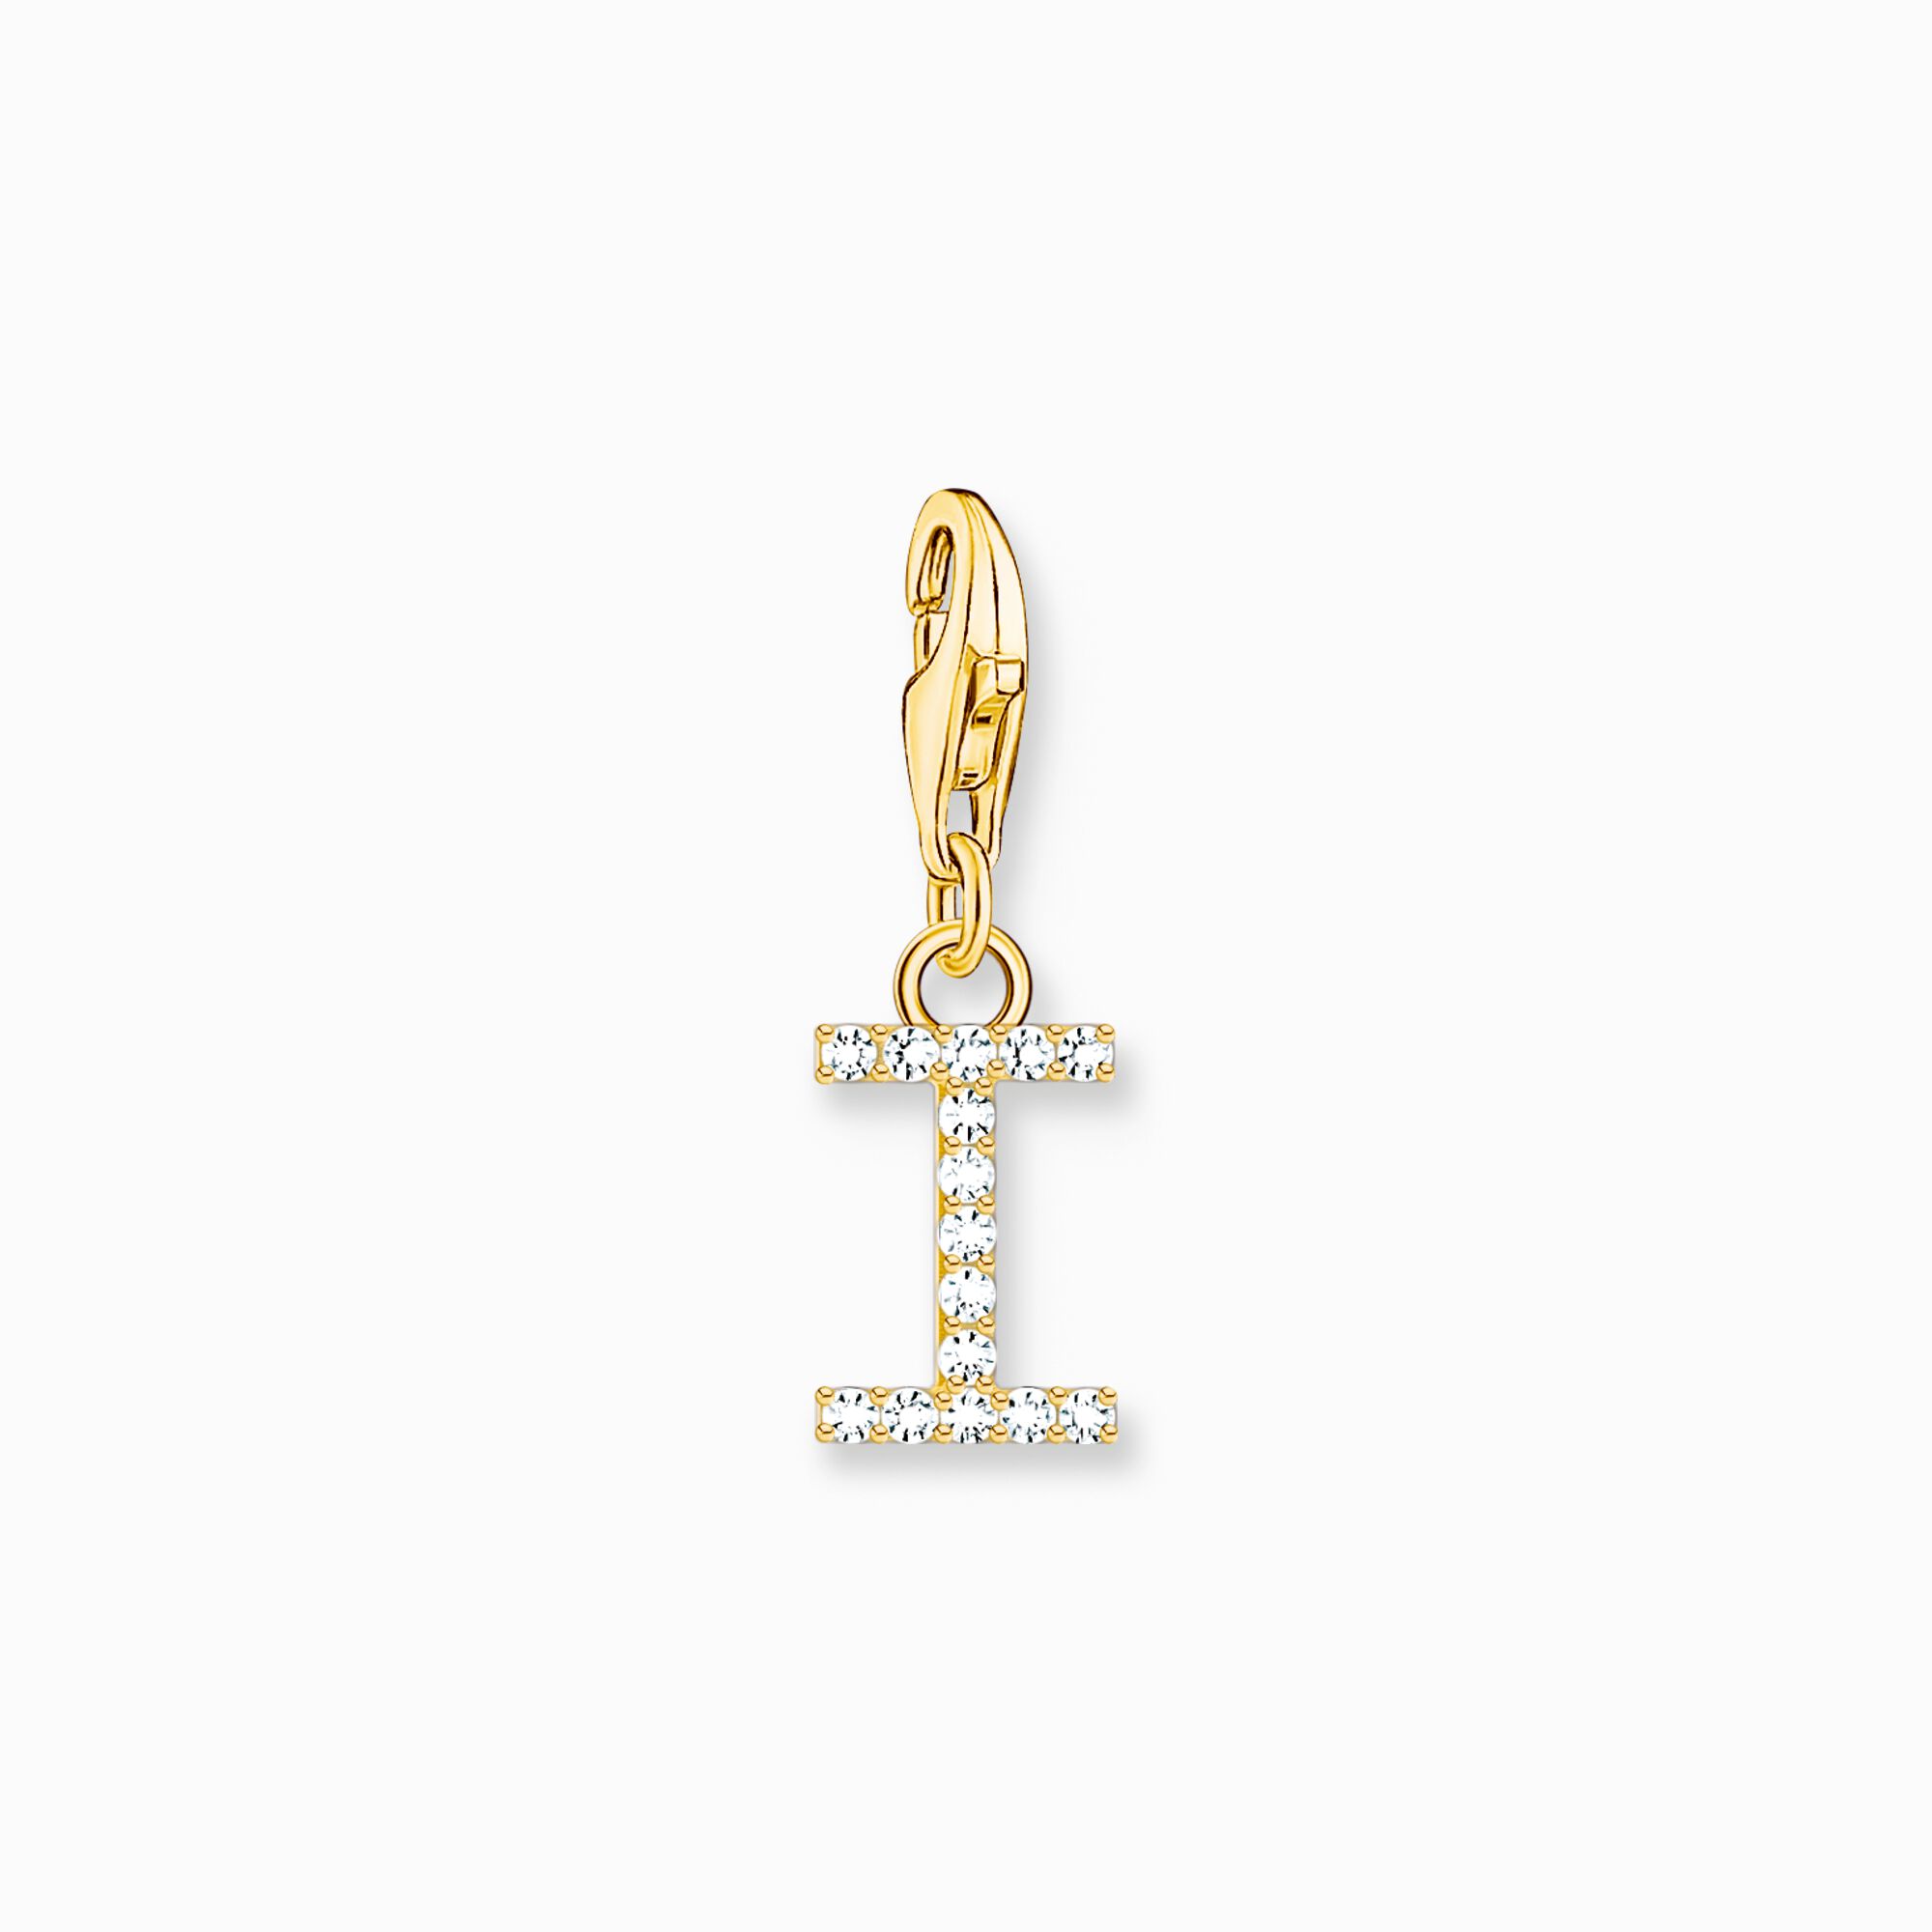 Charm pendant letter I with white stones gold plated from the Charm Club collection in the THOMAS SABO online store